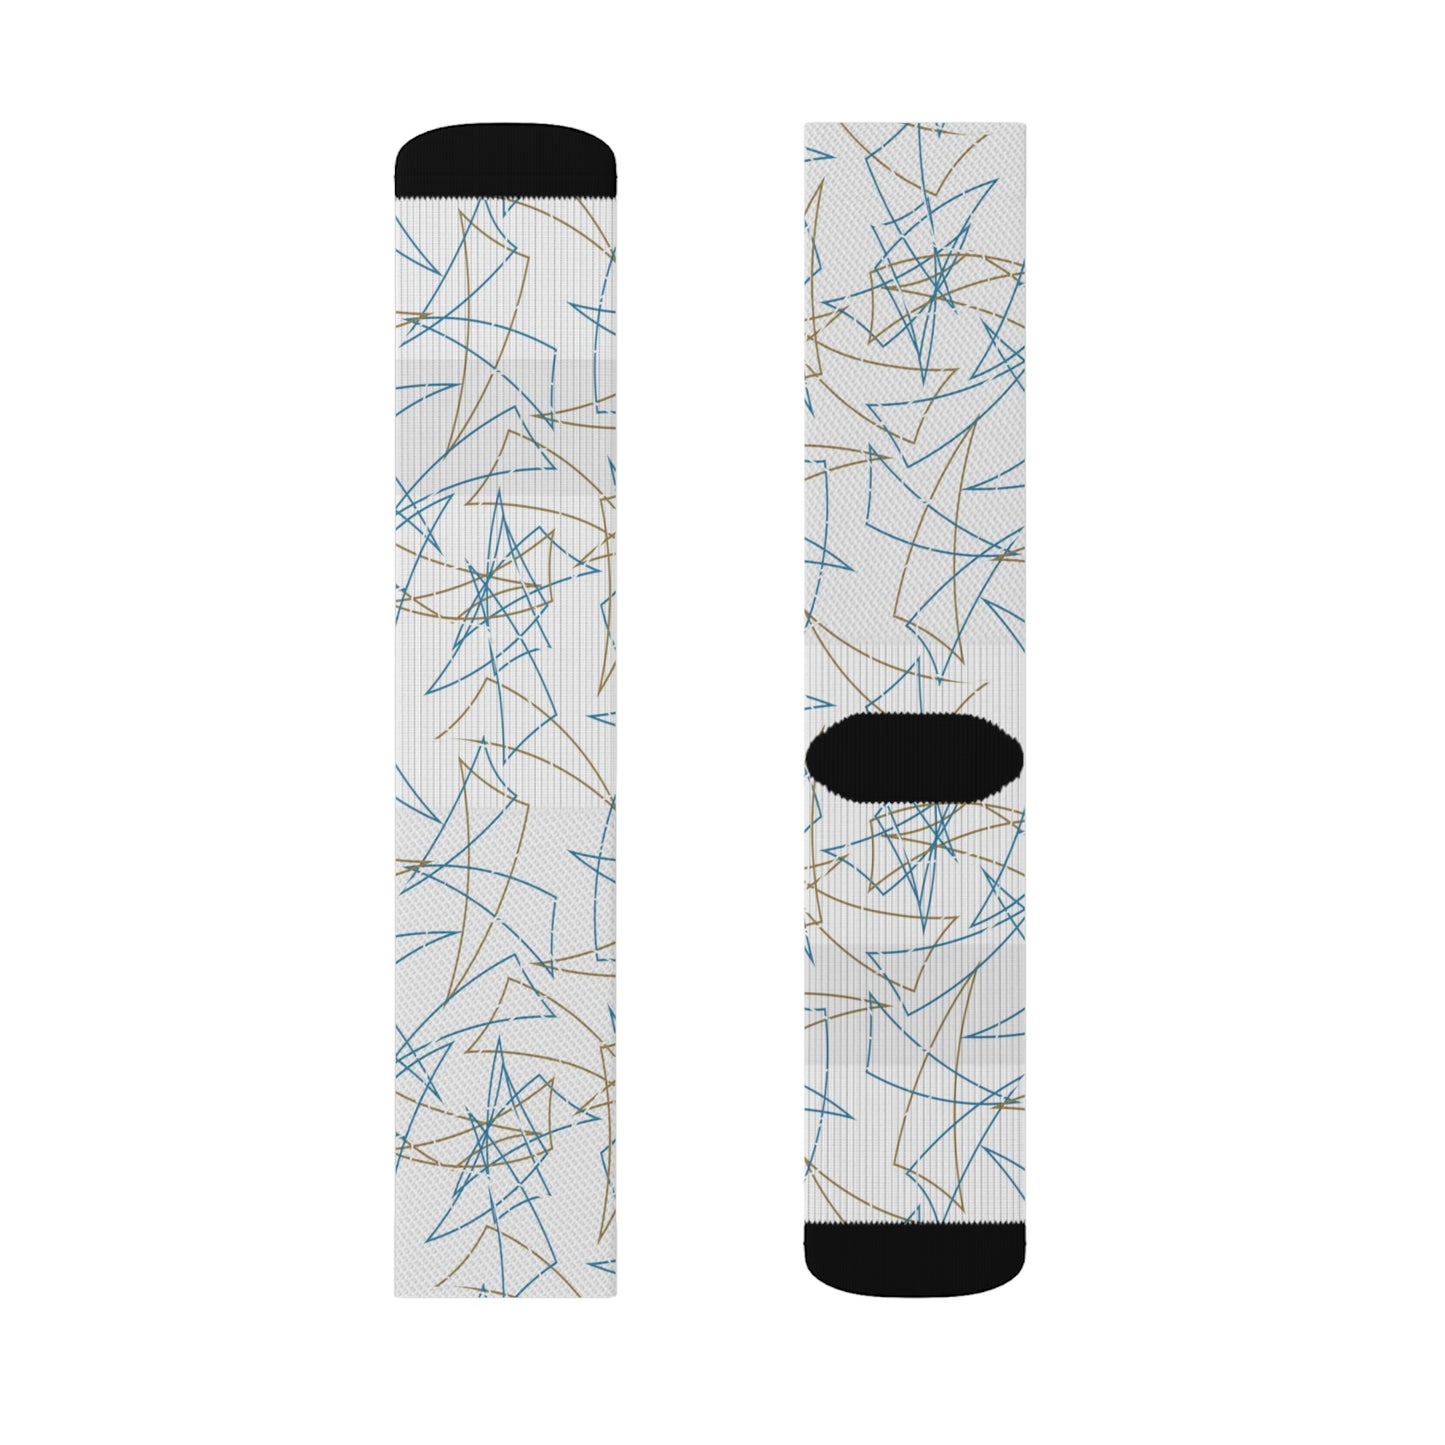 Formica Table Top  Pattern Socks - Bar Pizza Table Top Design